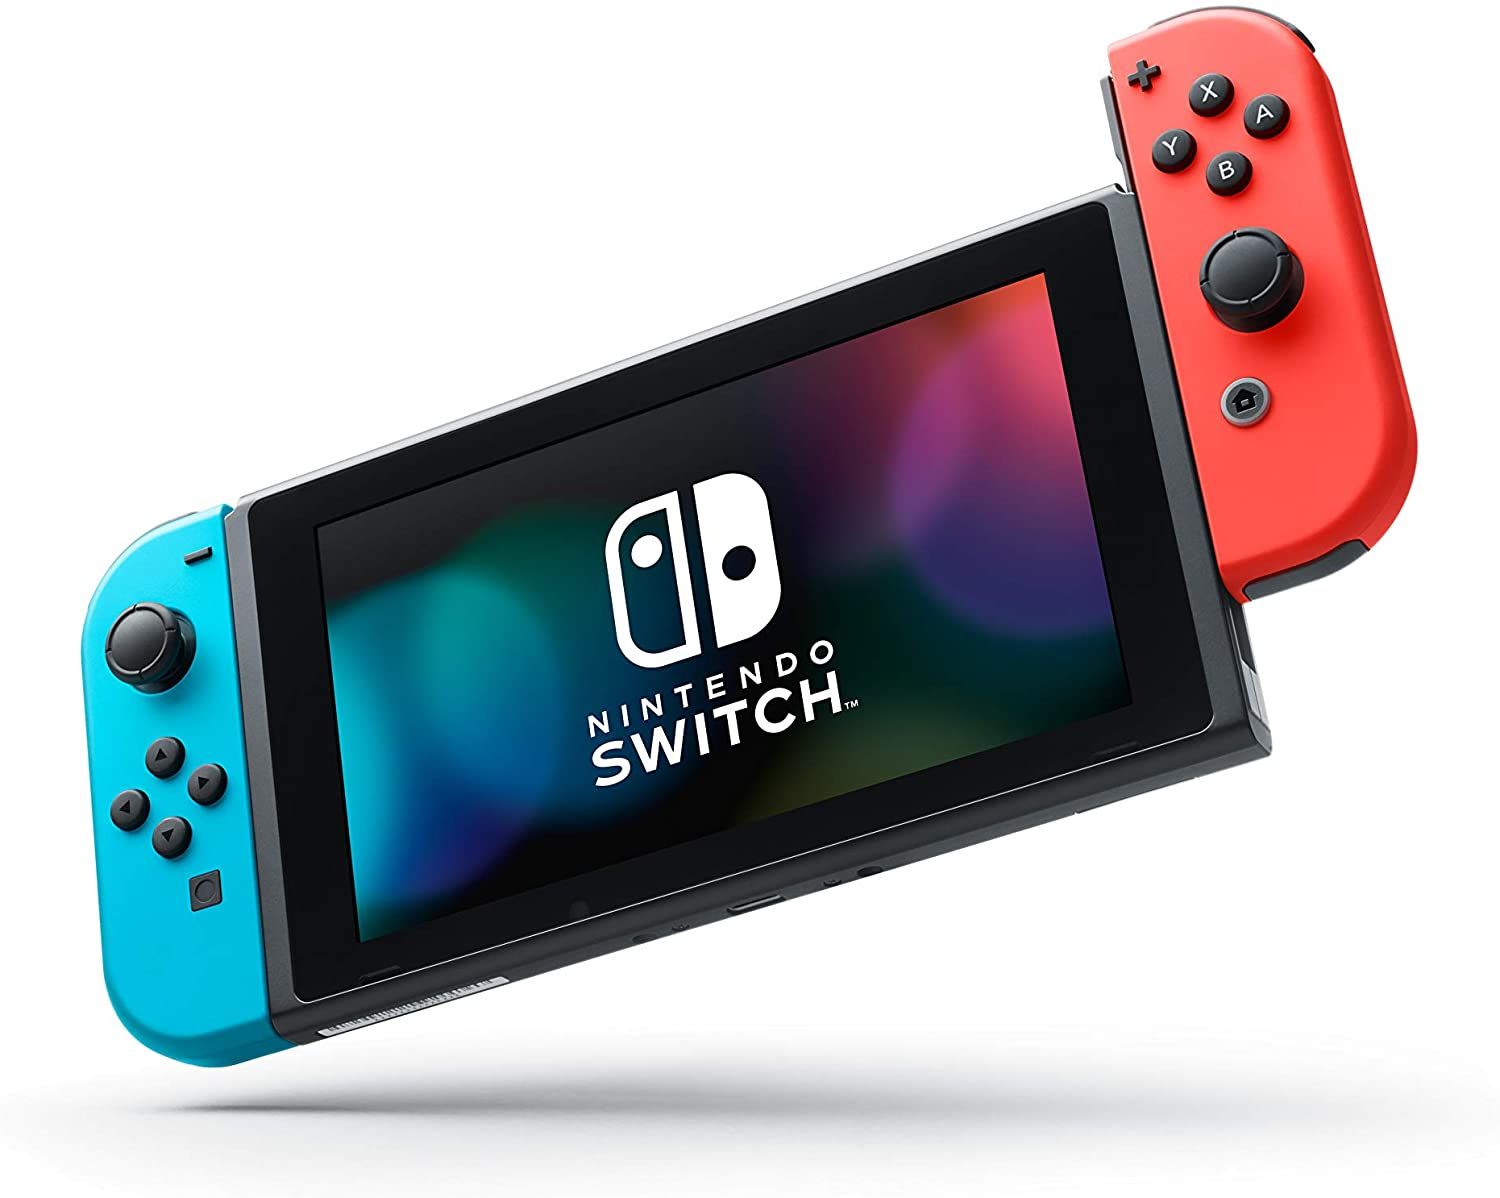 Nintendo Switch with blue and red controllers